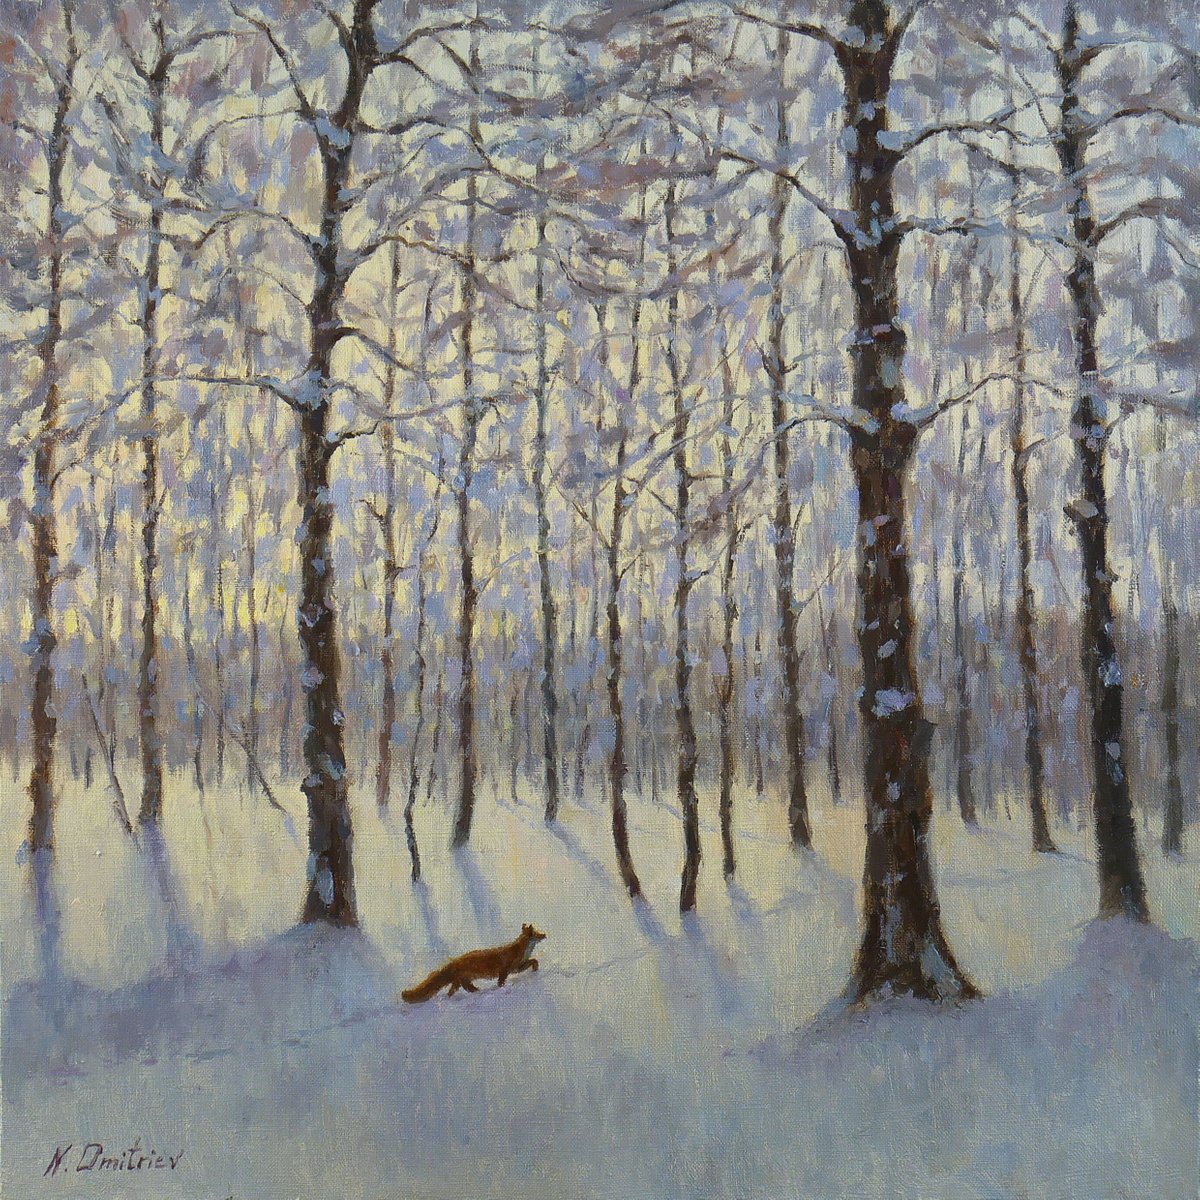 The Winter Morning In The Forest - winter landscape painting by Nikolay Dmitriev